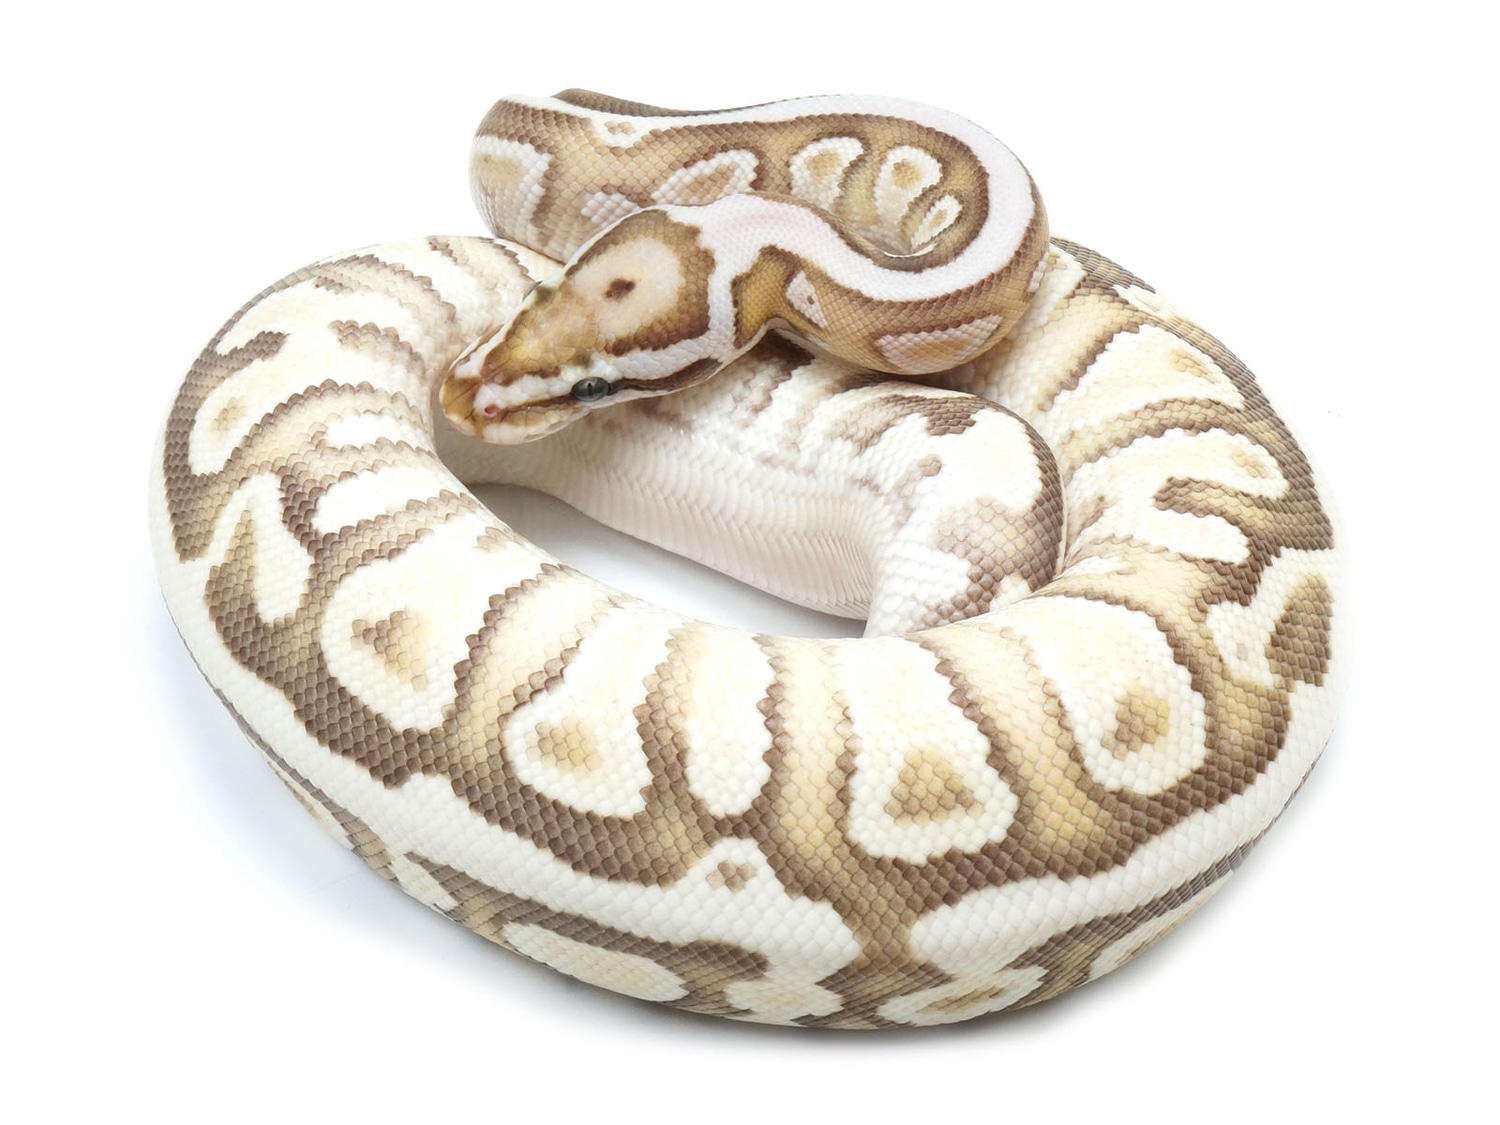 Lesser Spotnose + From Odium Ball Python by New England Reptile Distributors